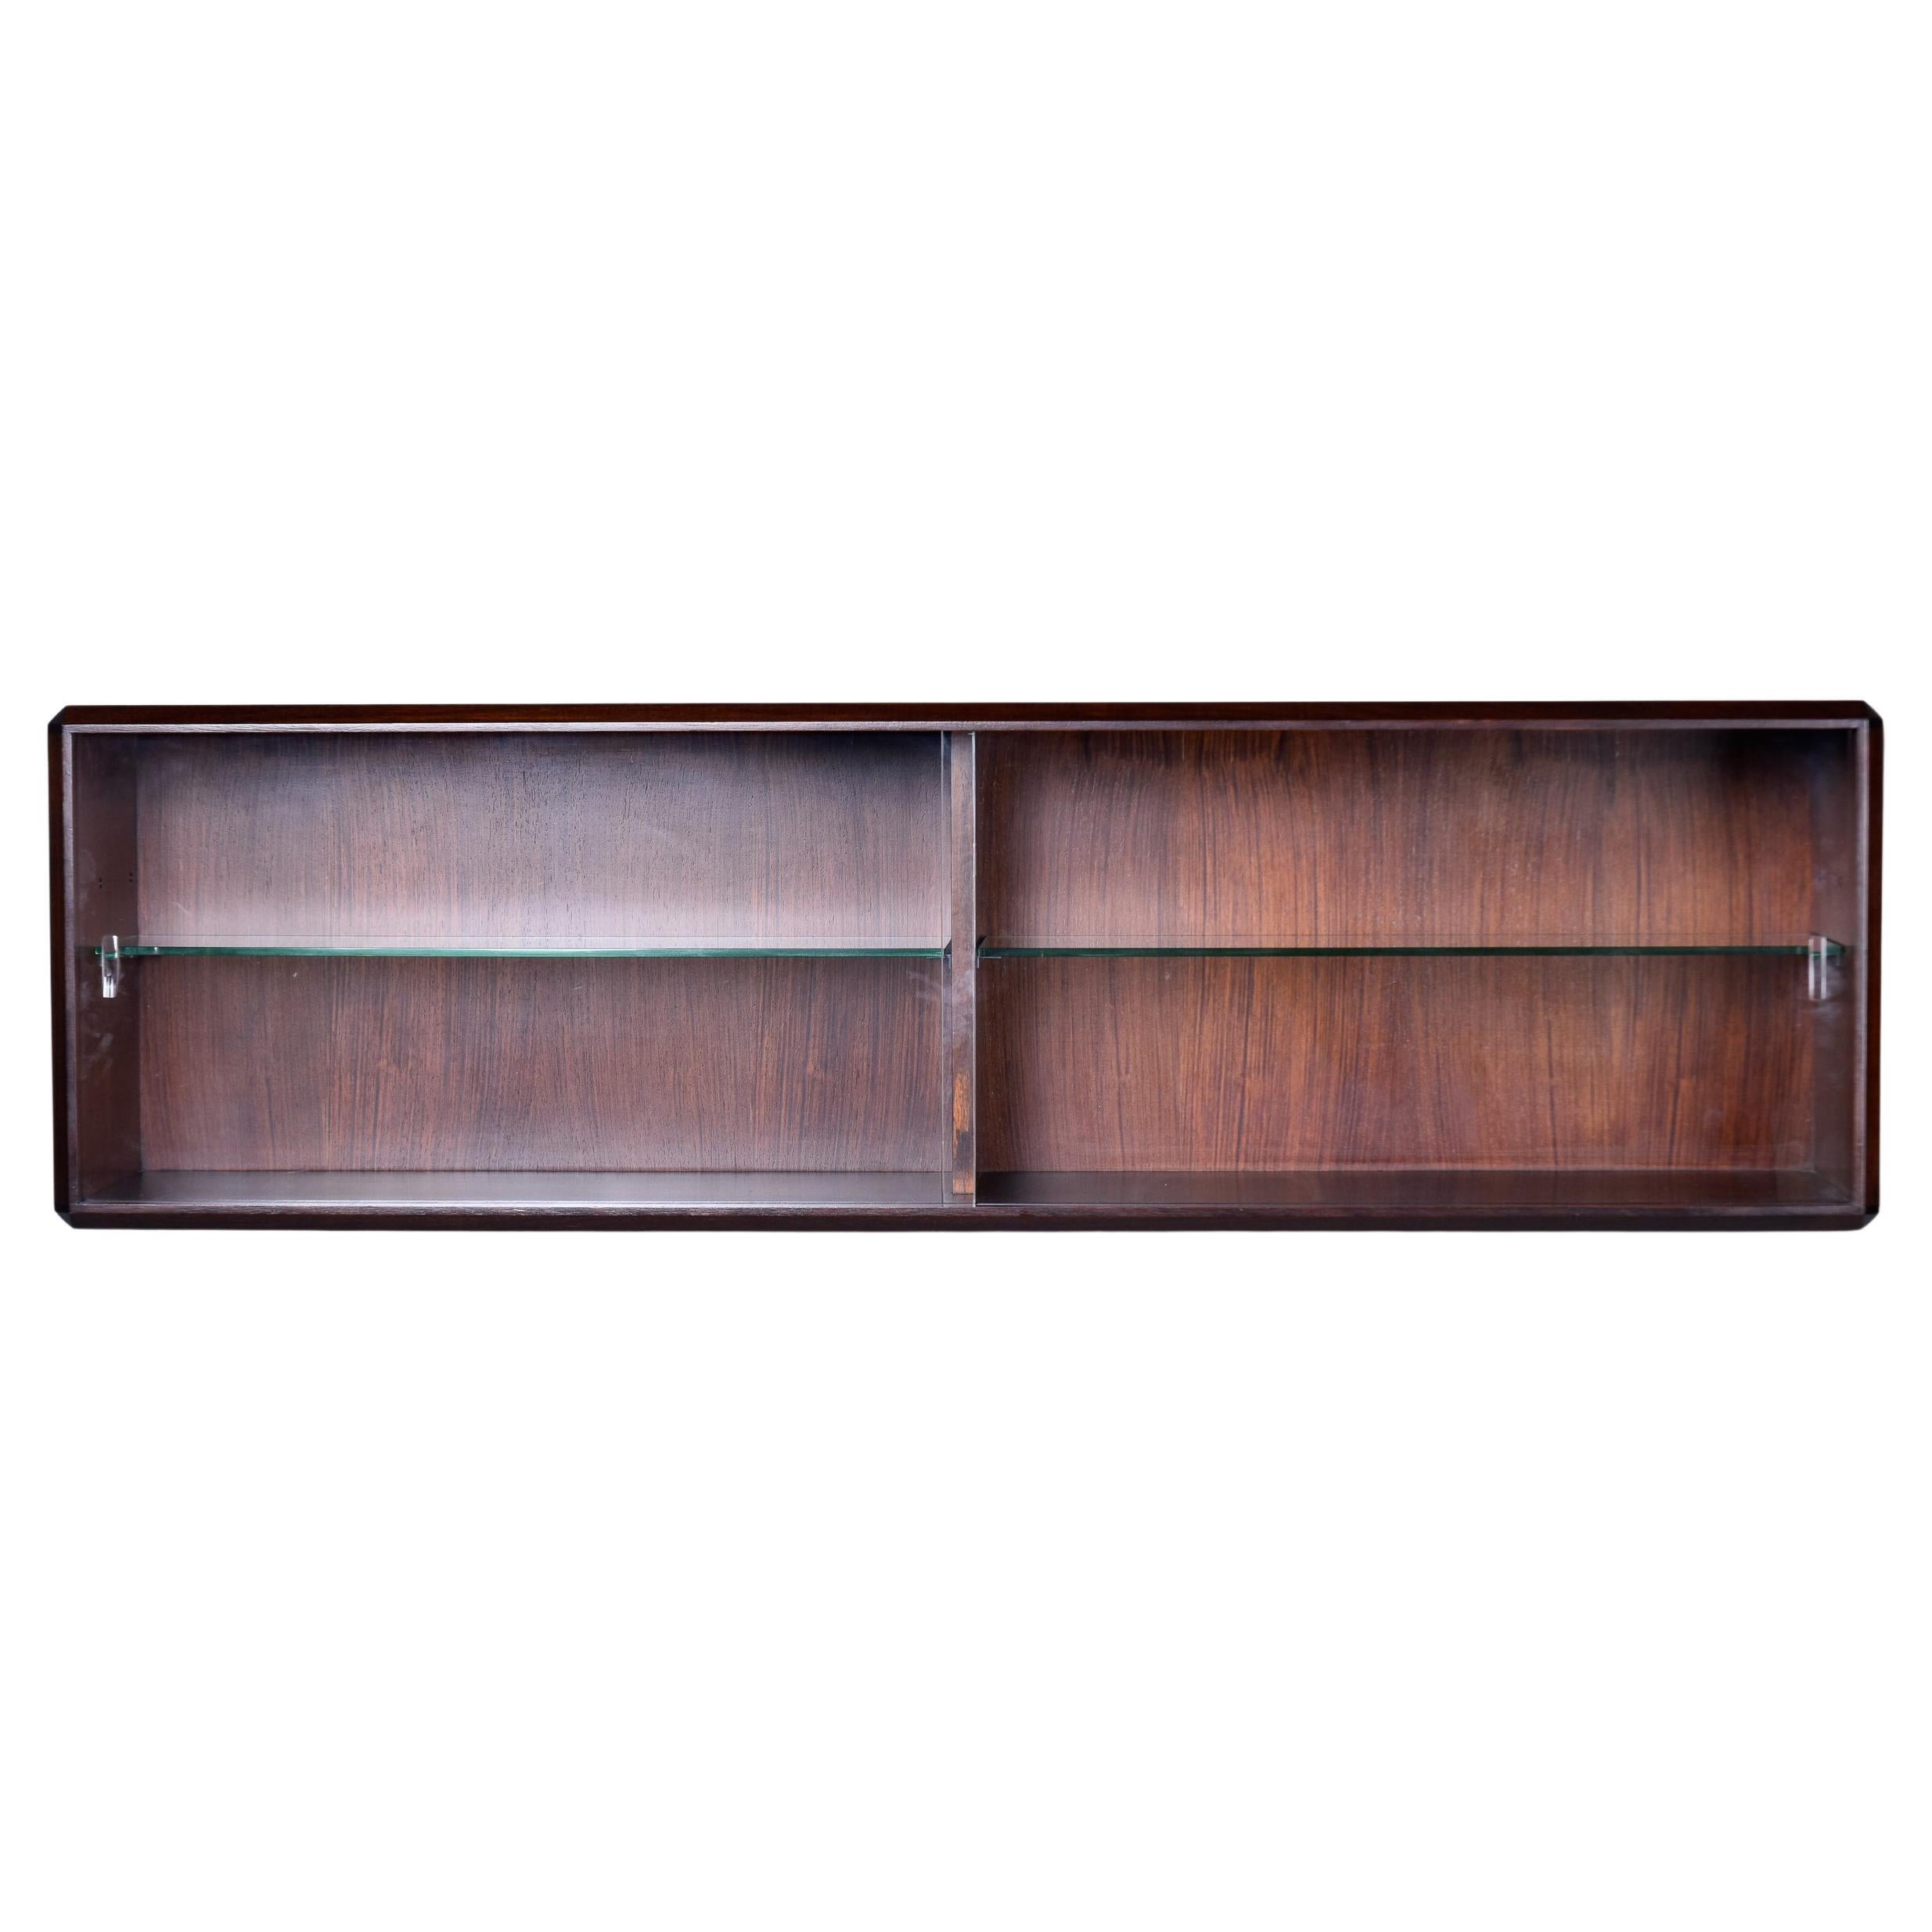 Italian Mid Century Wall Cabinet In Walnut with Glass Doors and Interior Shelves For Sale